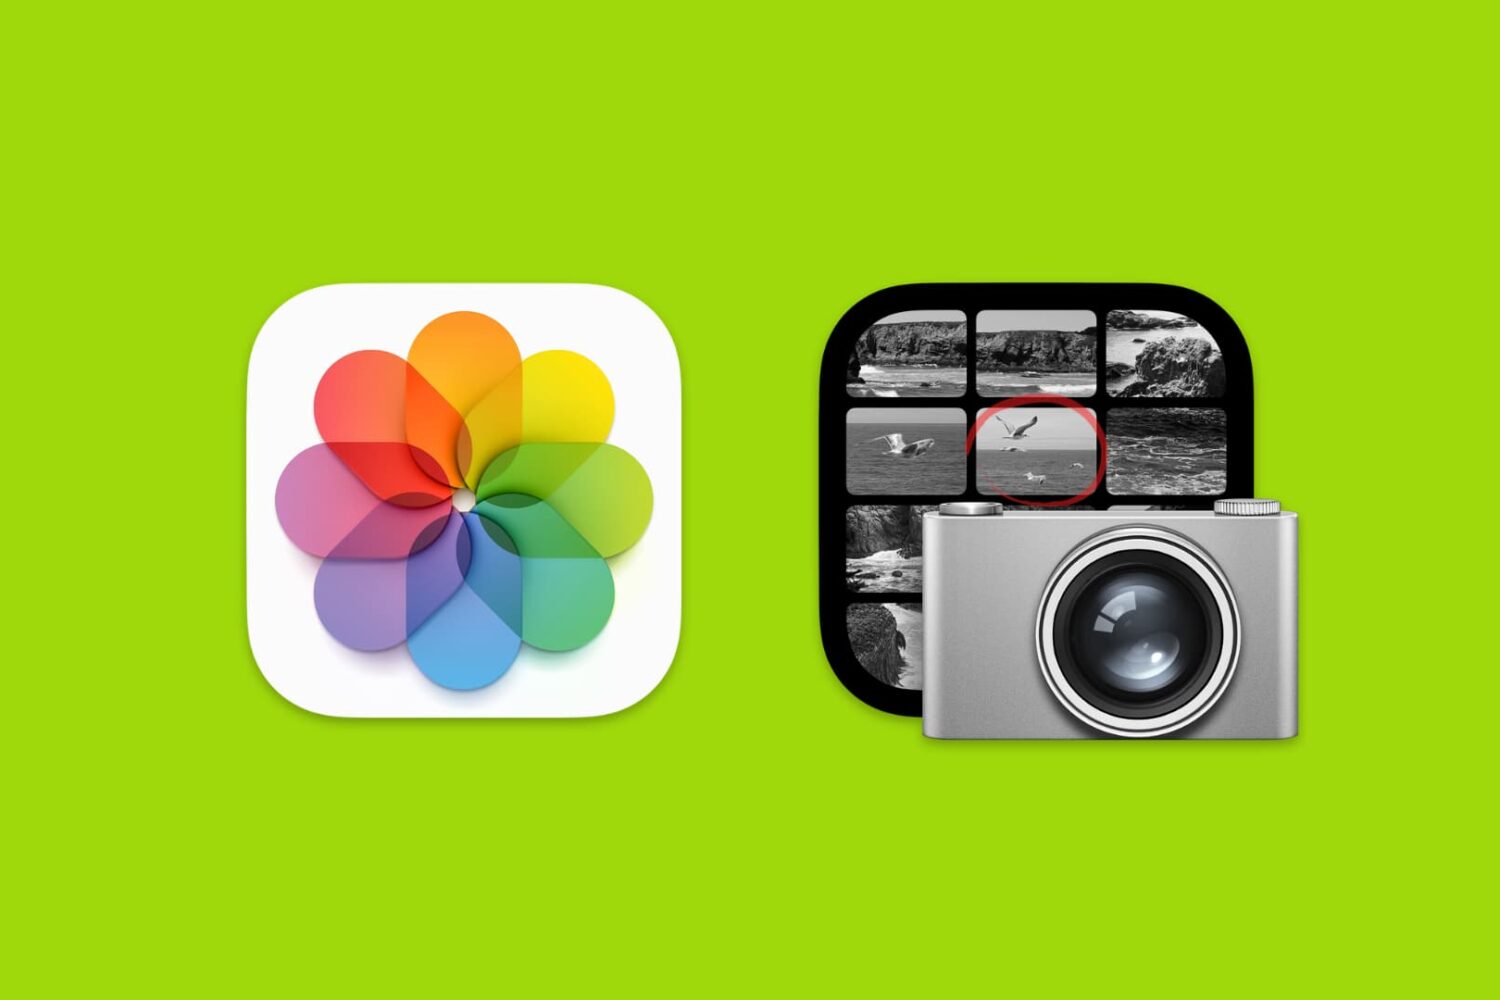 Mac's Photos and Image Capture app icons